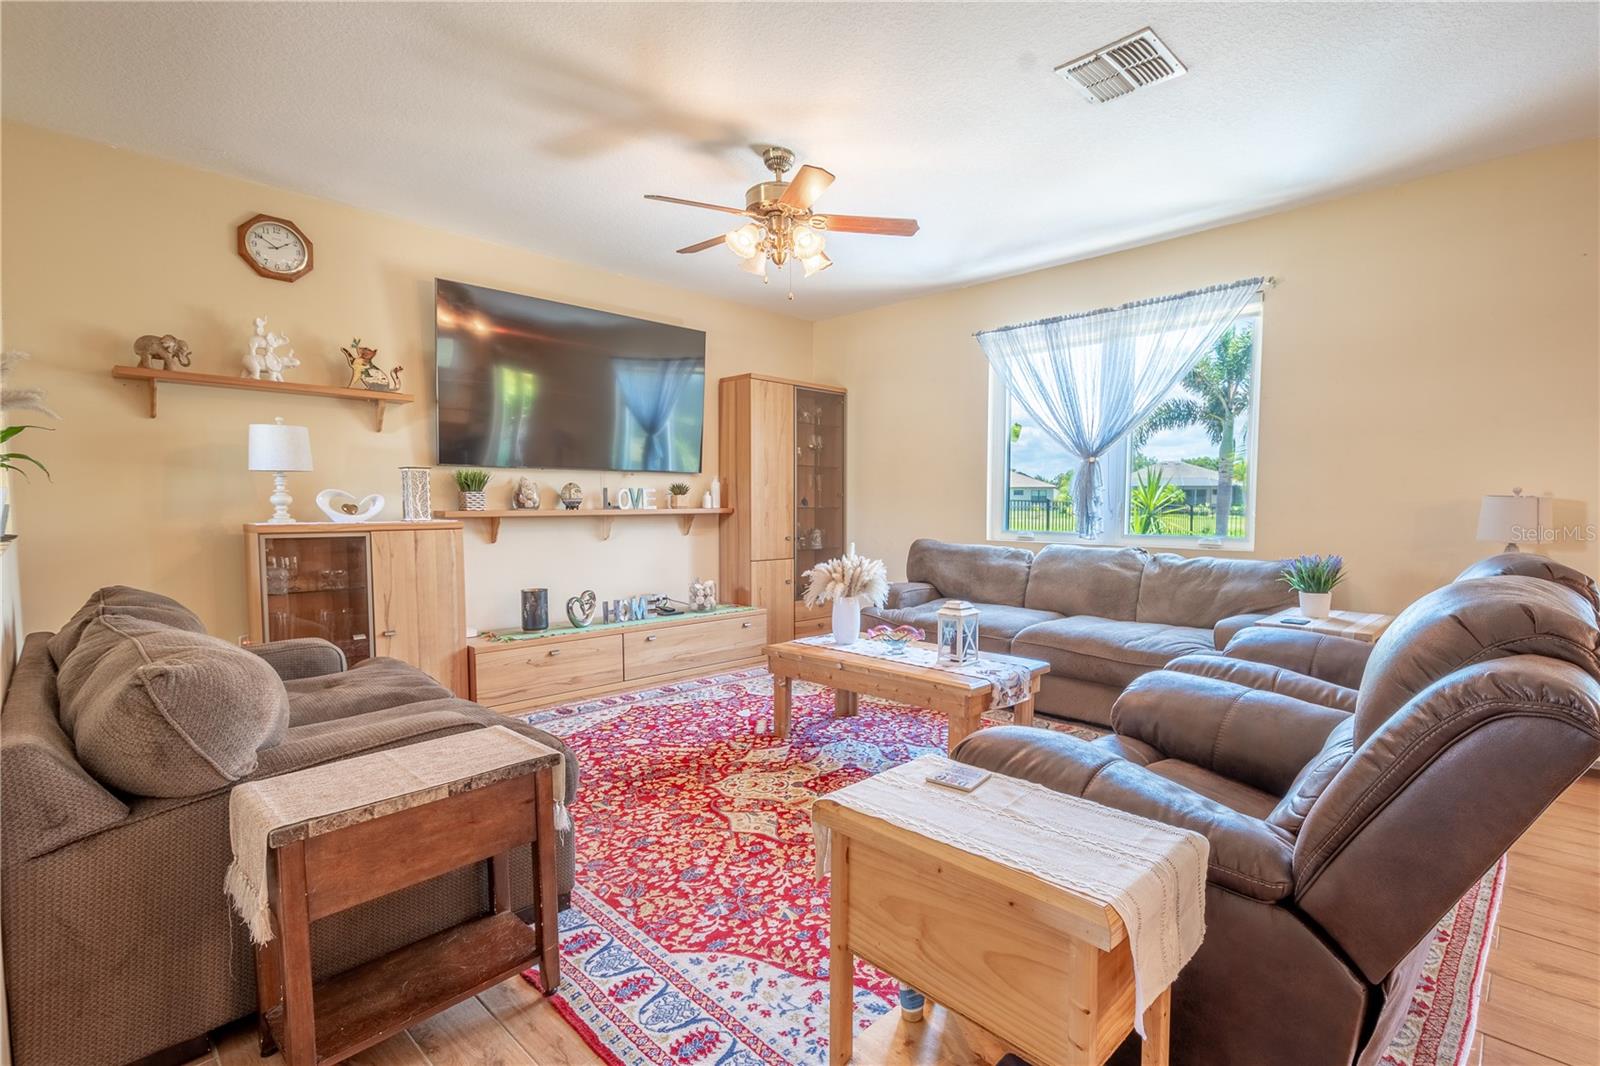 The living room features a picture window with a view of the tropical backyard, and a ceiling fan for year round comfort.